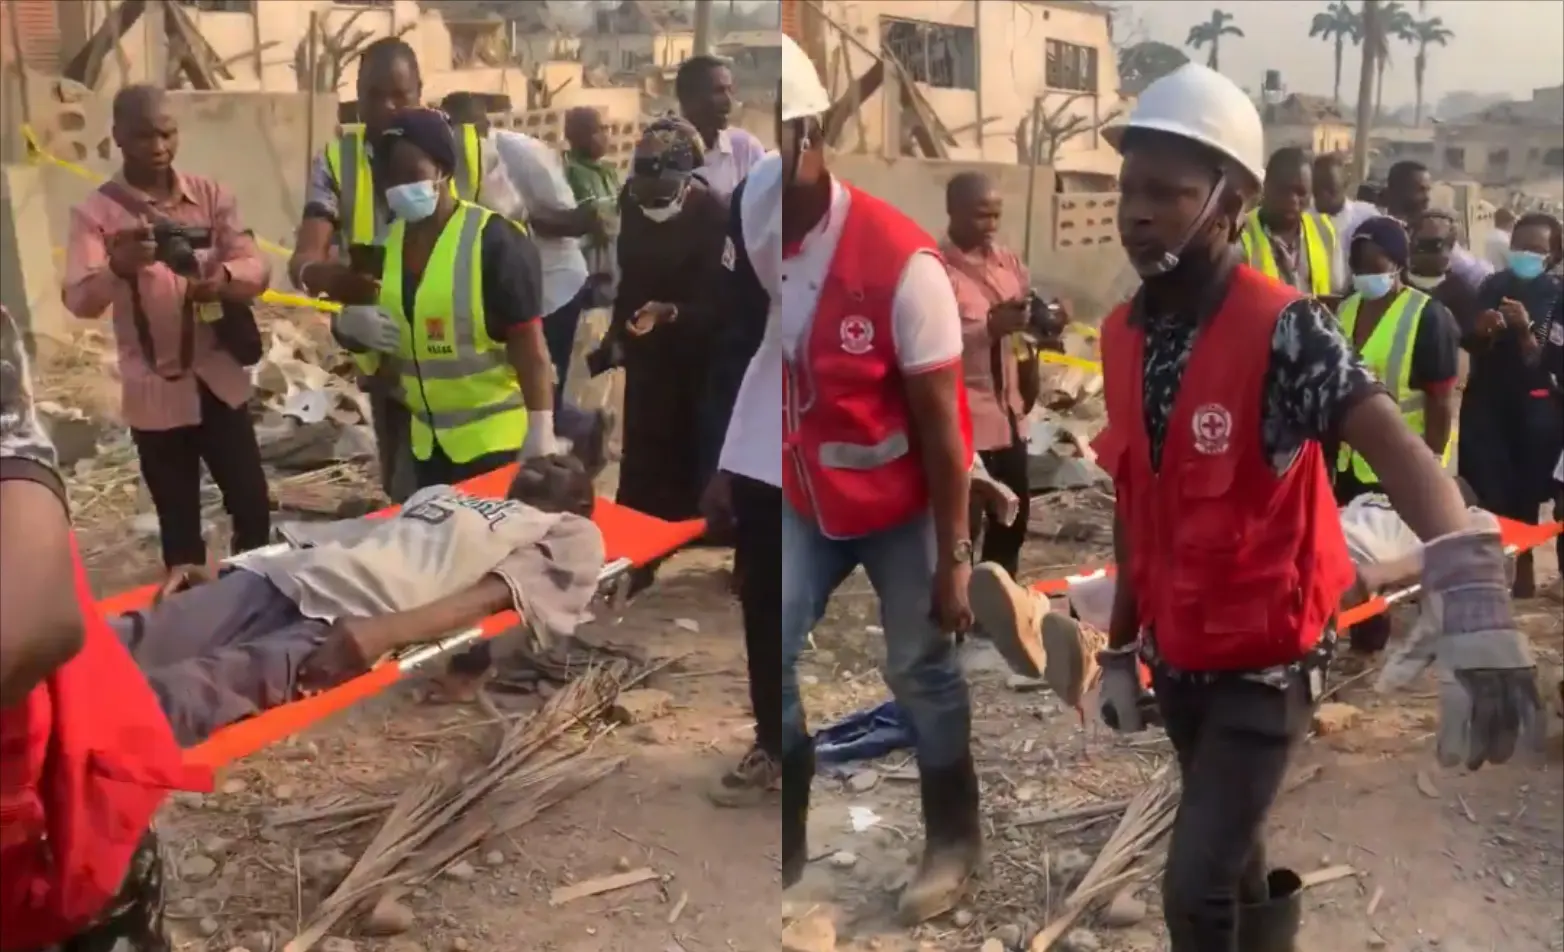 Ibadan Explosion: More videos emerge as victims are being pulled out from rubble